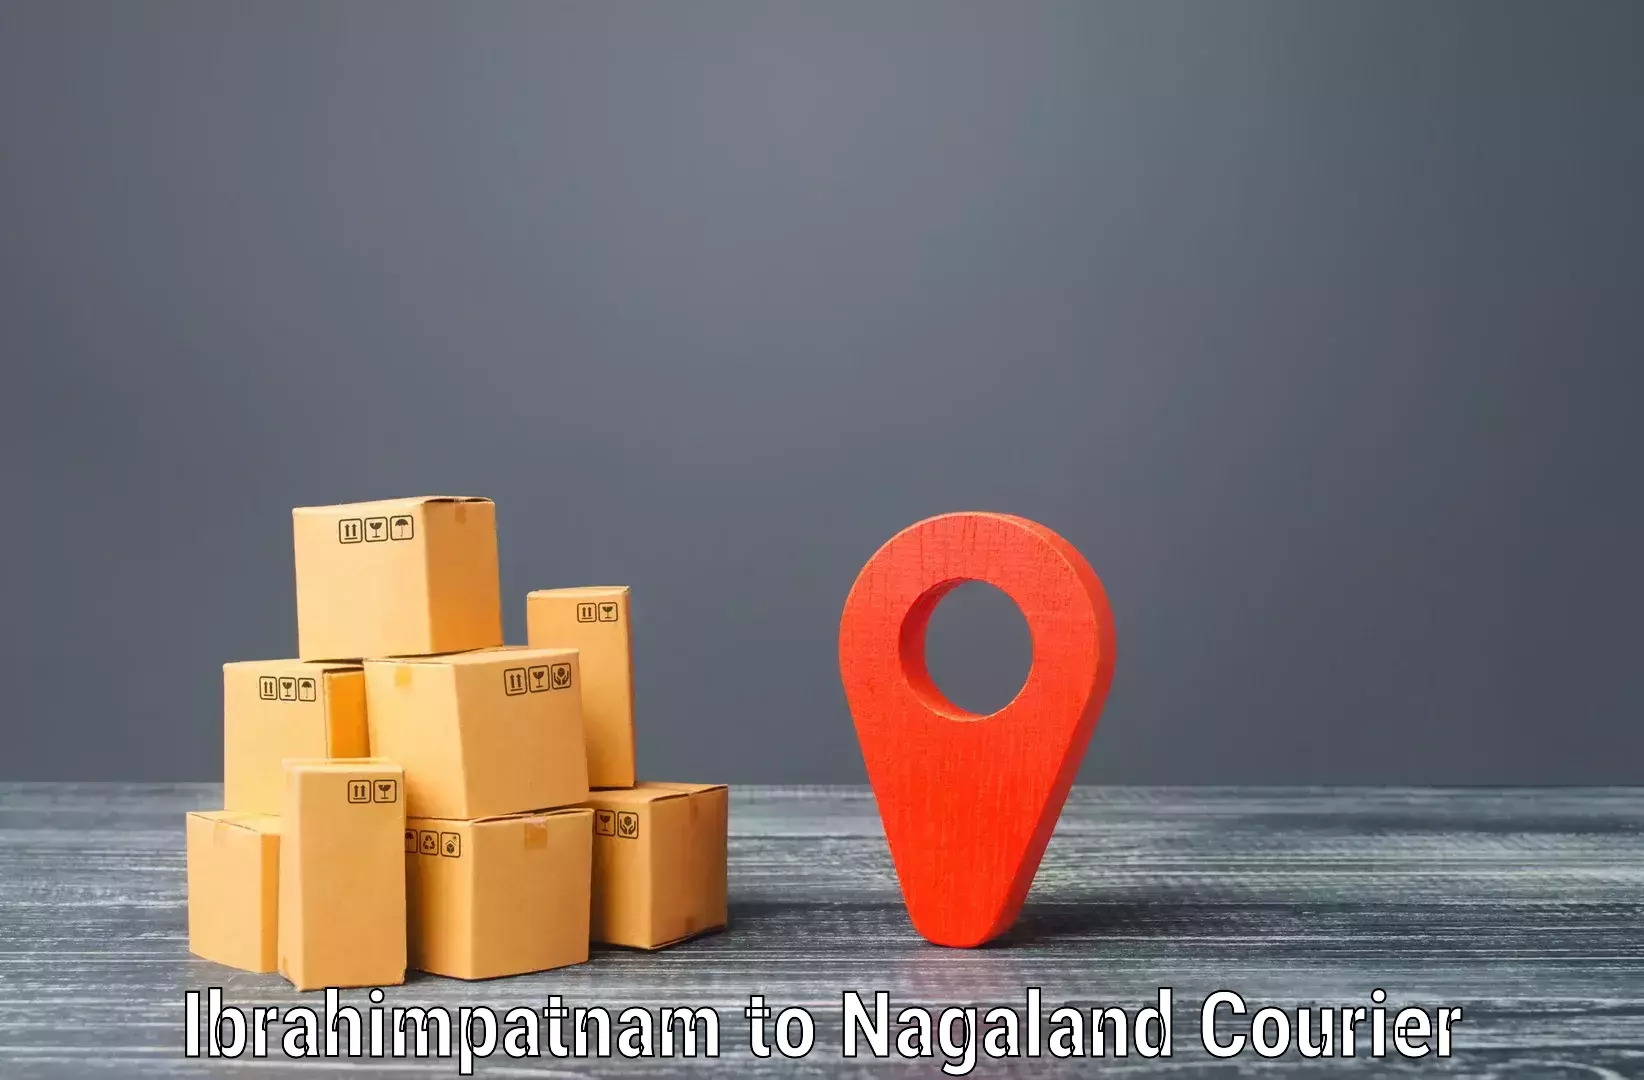 Quality courier services in Ibrahimpatnam to Dimapur